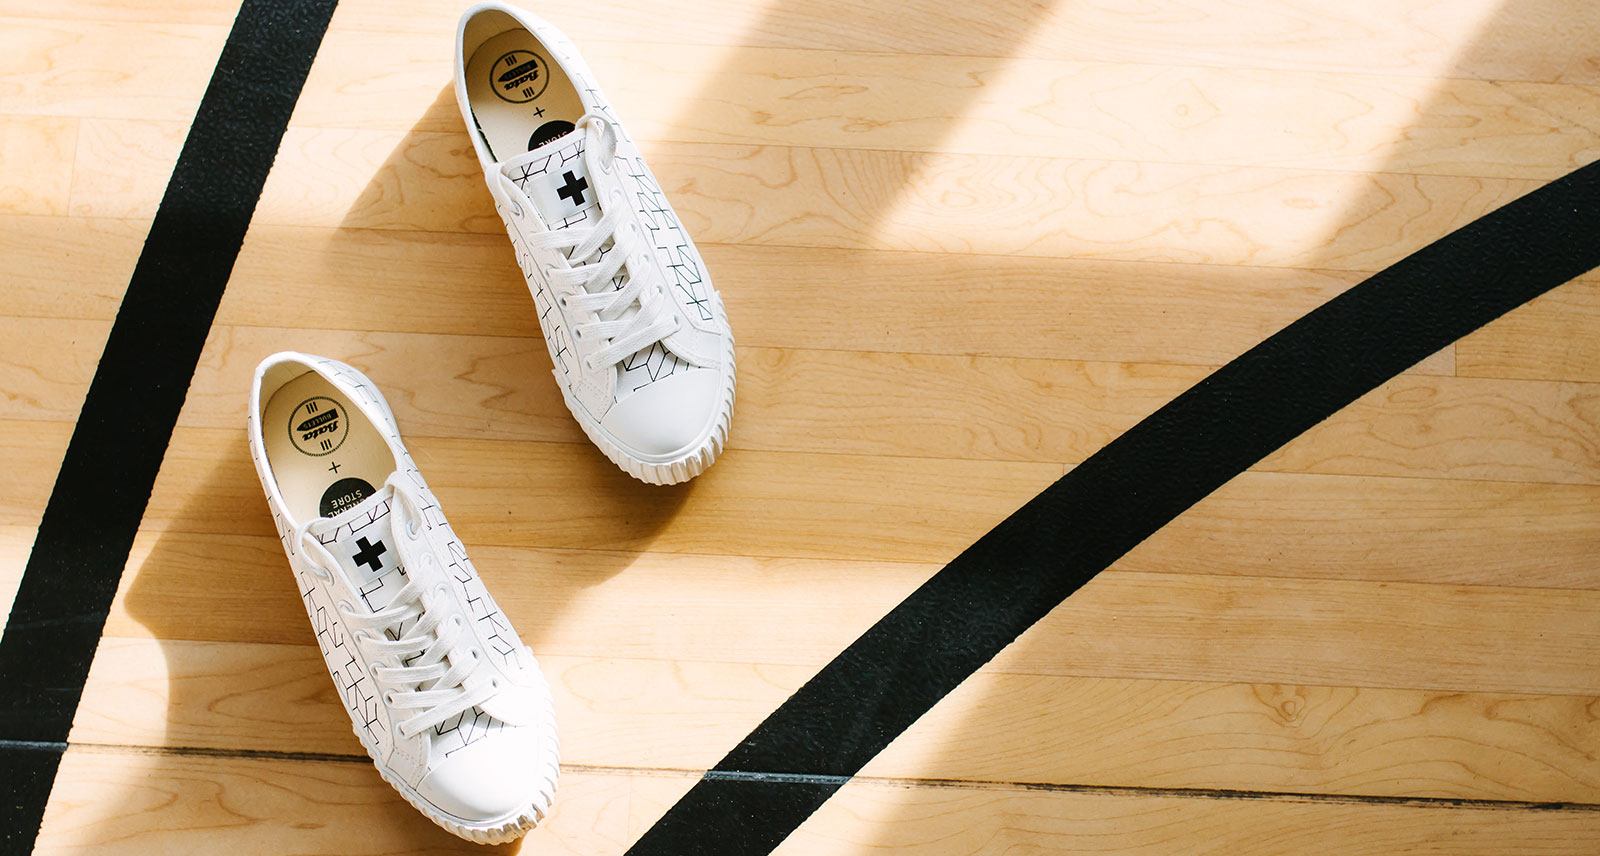 These Bata x Drake General Store Sneakers Are a Part of Our Heritage